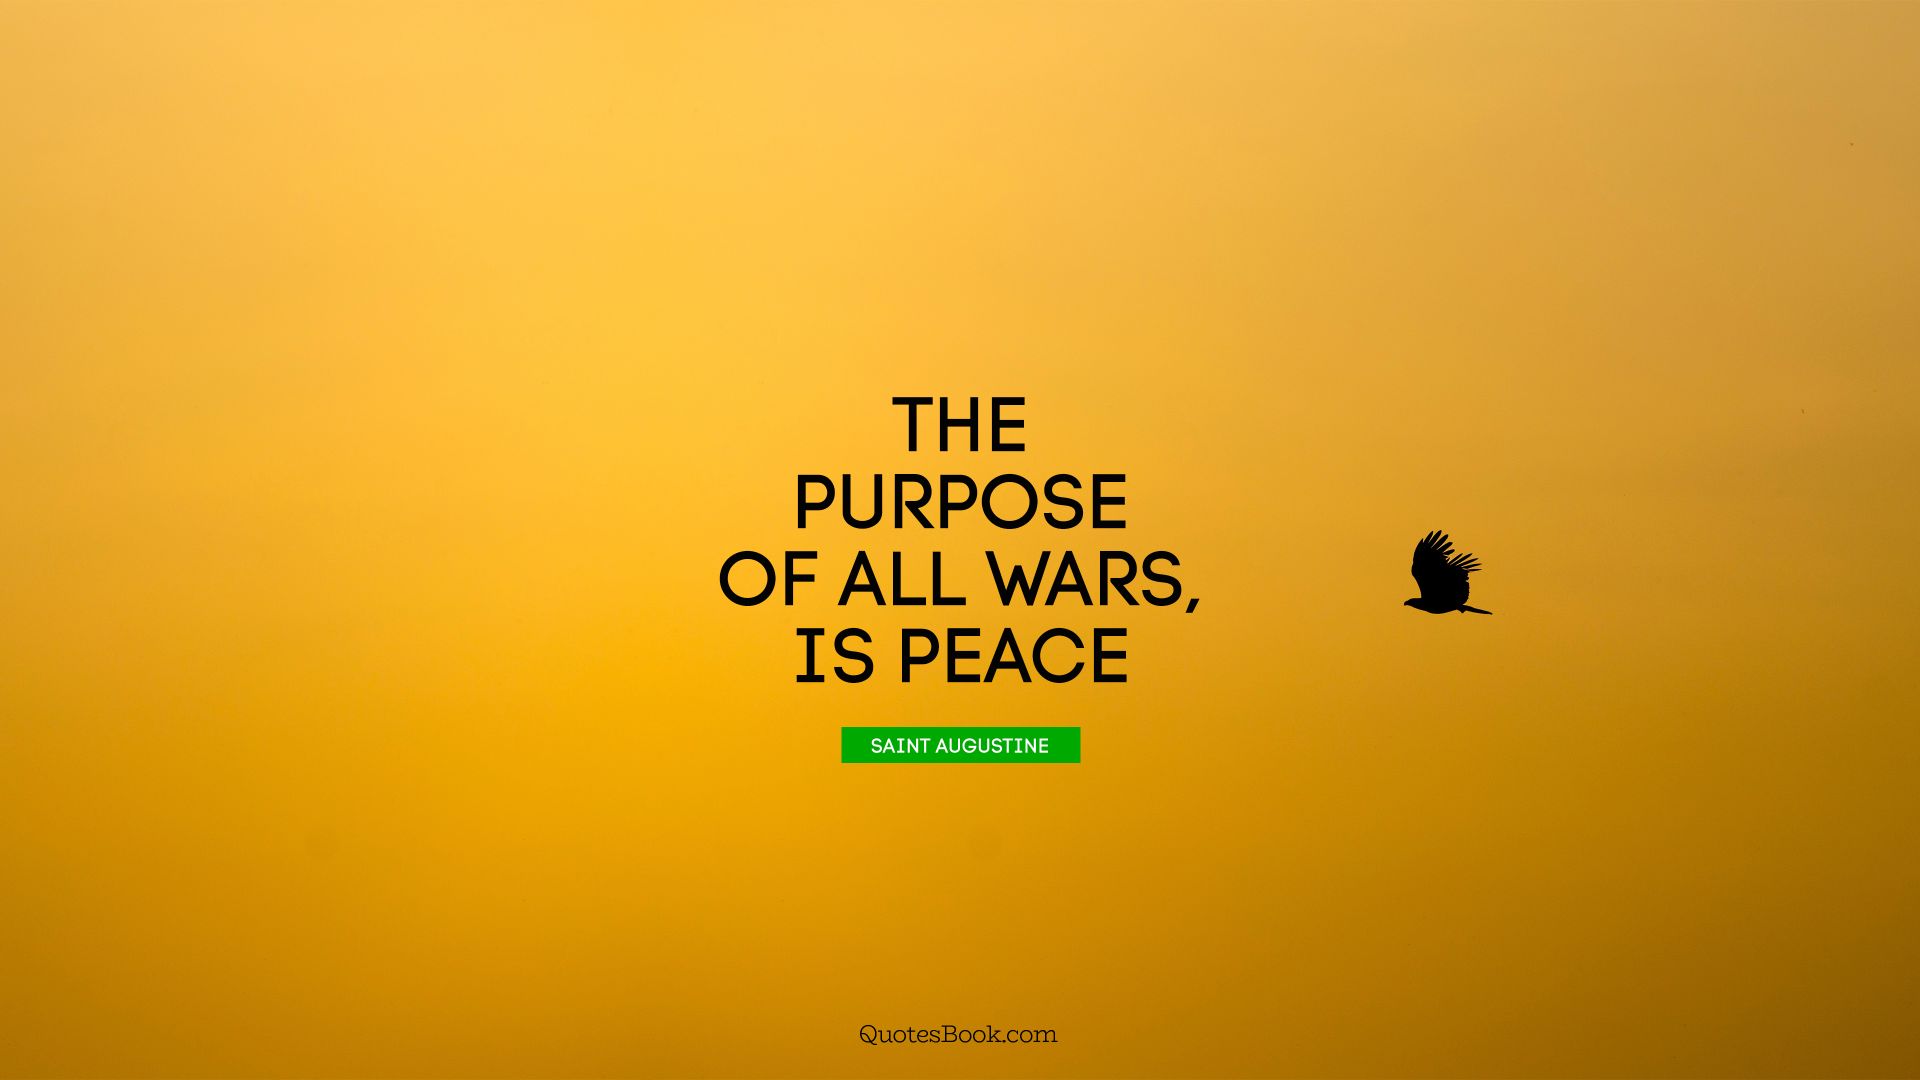 The purpose of all wars, is peace. - Quote by Saint Augustine